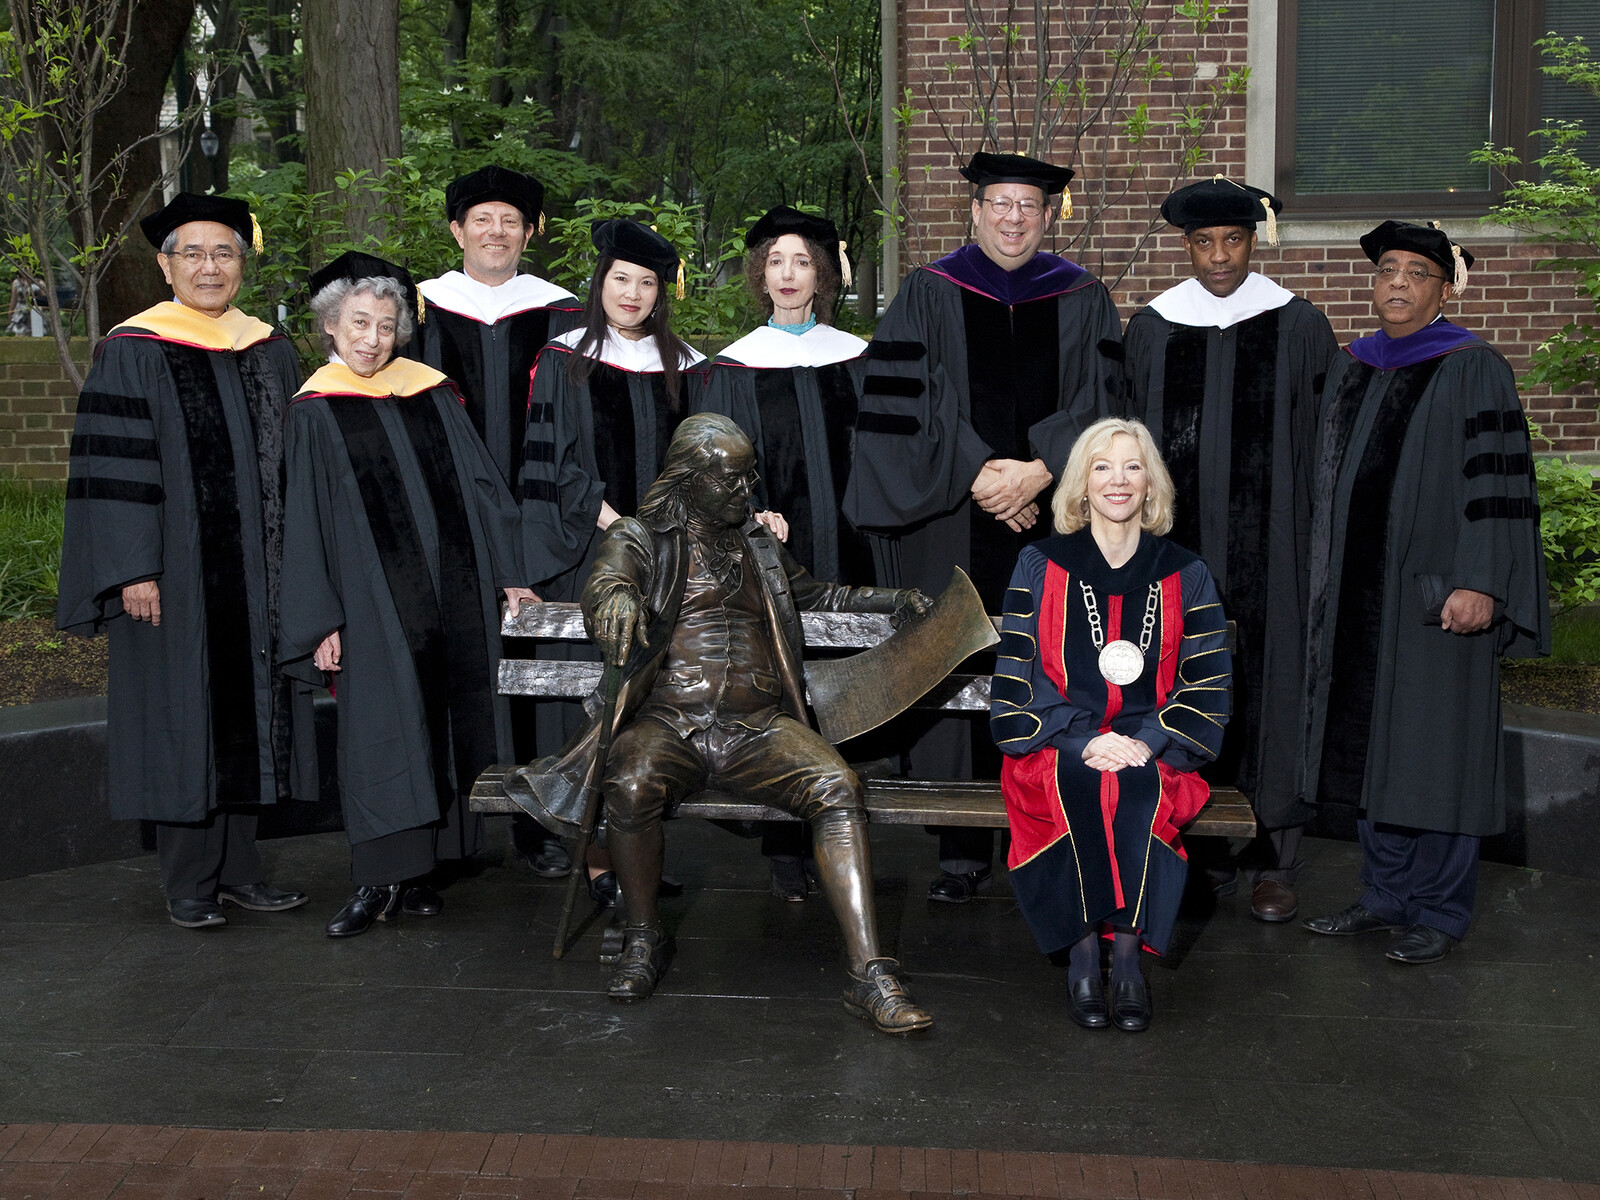 Amy Gutmann and 2011 honorary degree recipients in regalia